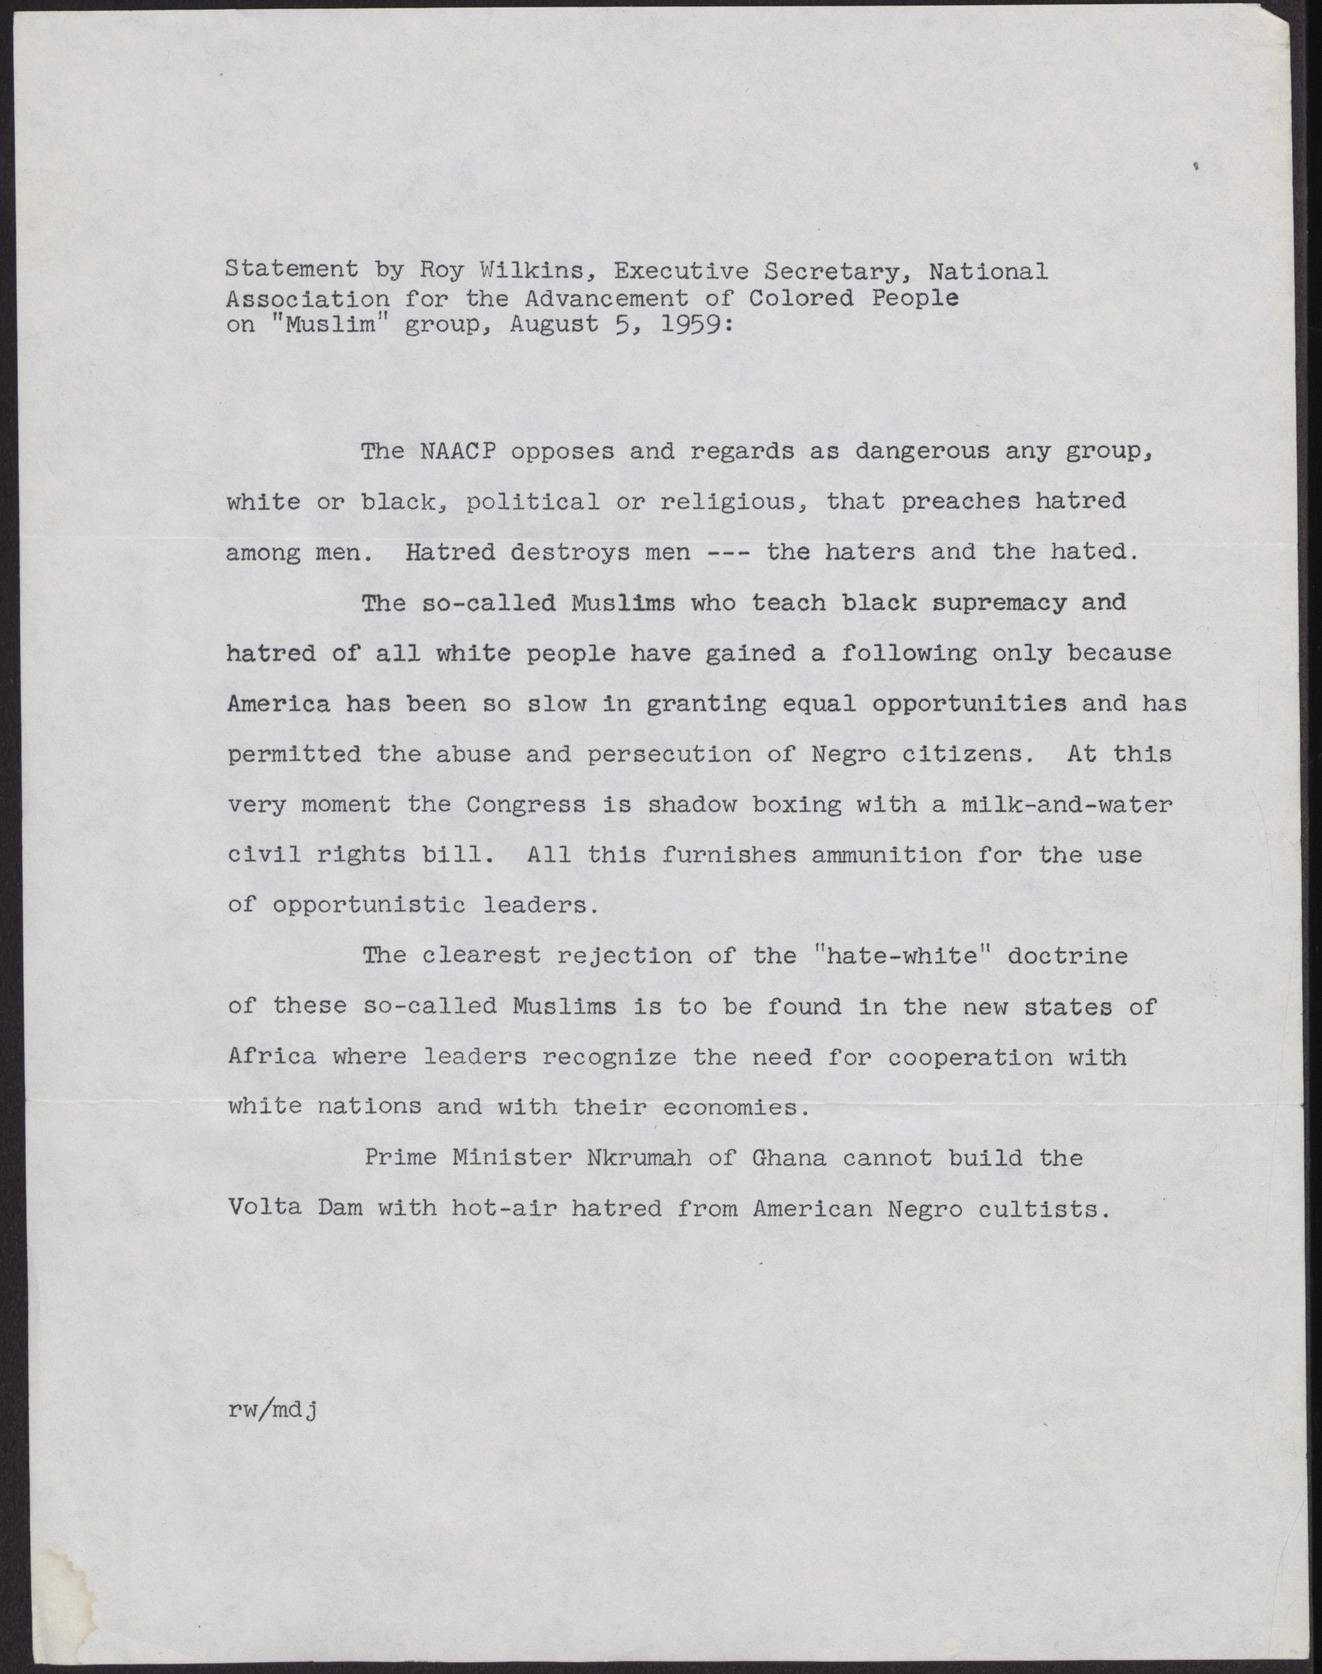 Statement by Roy Wilkins, Executive Secretary, NAACP, on "Muslim" group, August, 1959